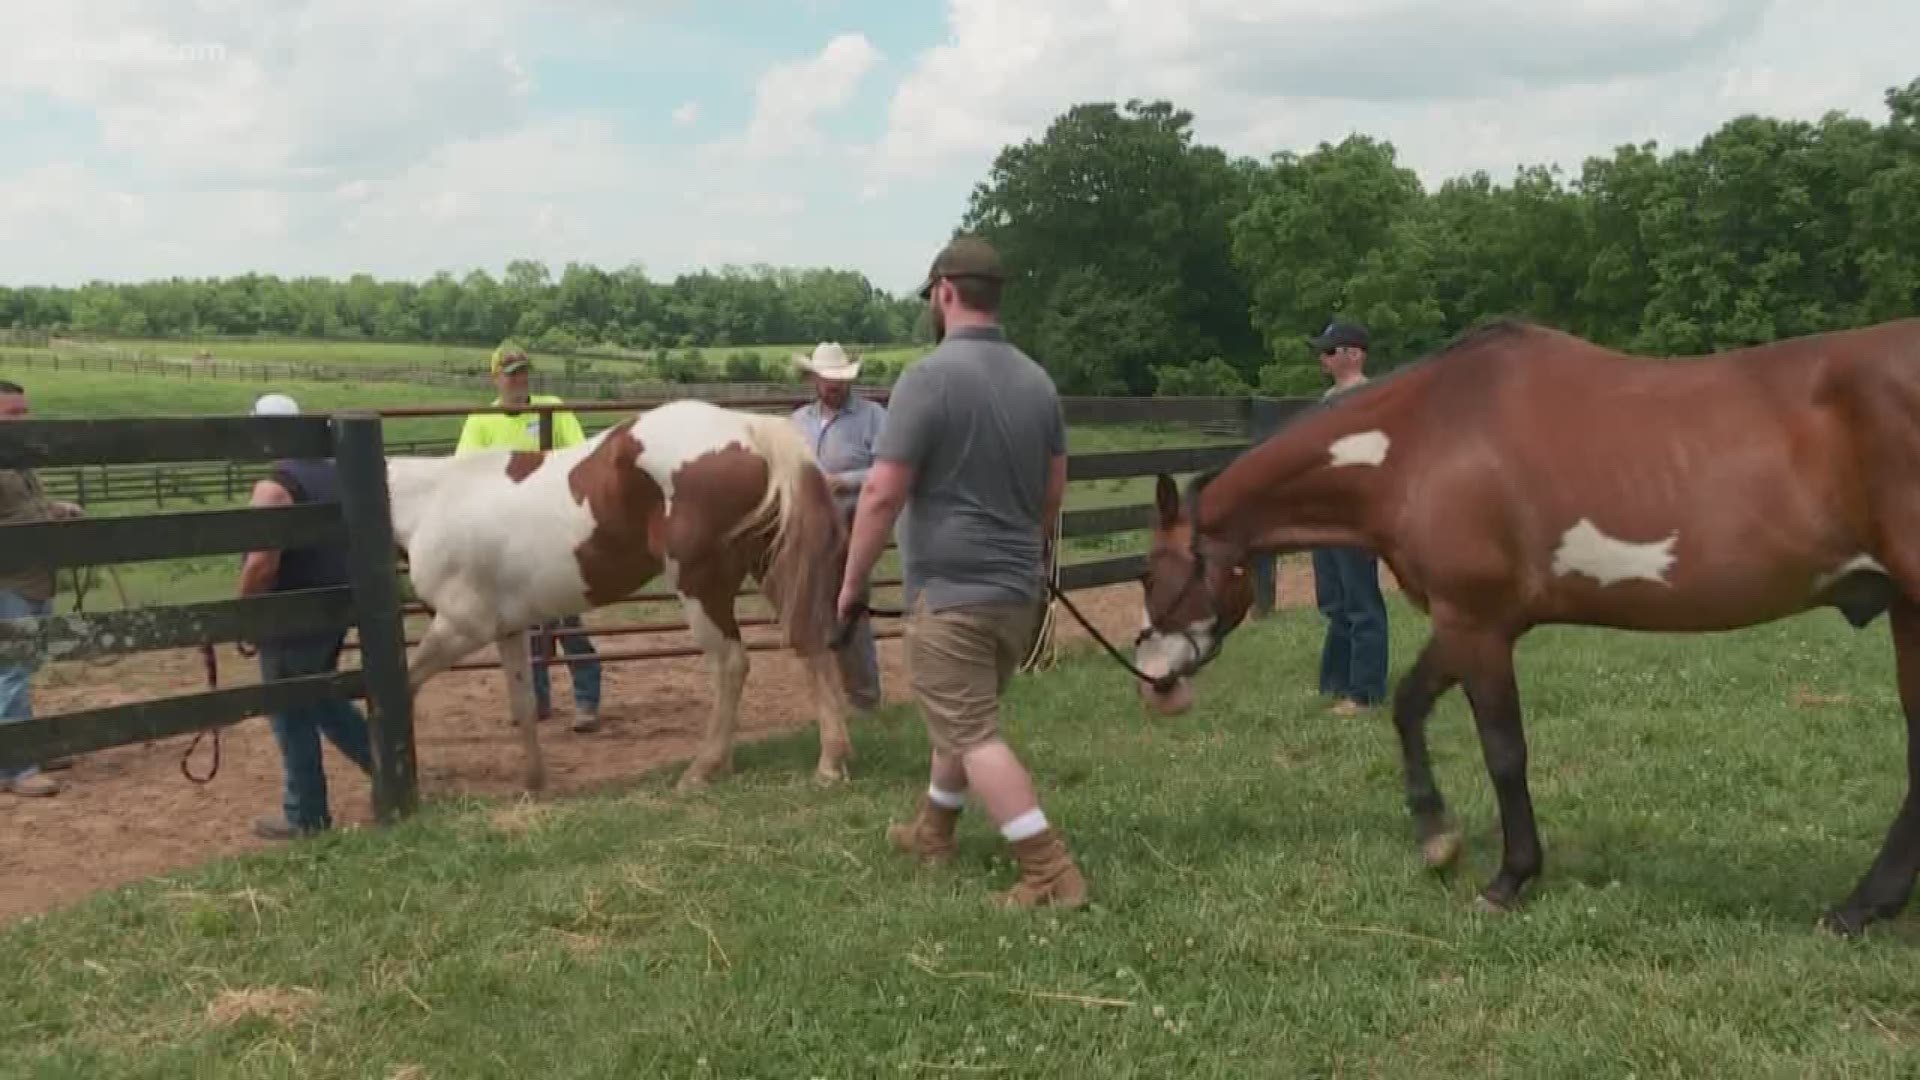 Memorial Day can be tough.  For veterans who came home from war but lost their comrades, the day can be a painful reminder. One club in Shelbyville is offering relief with the help of horses.